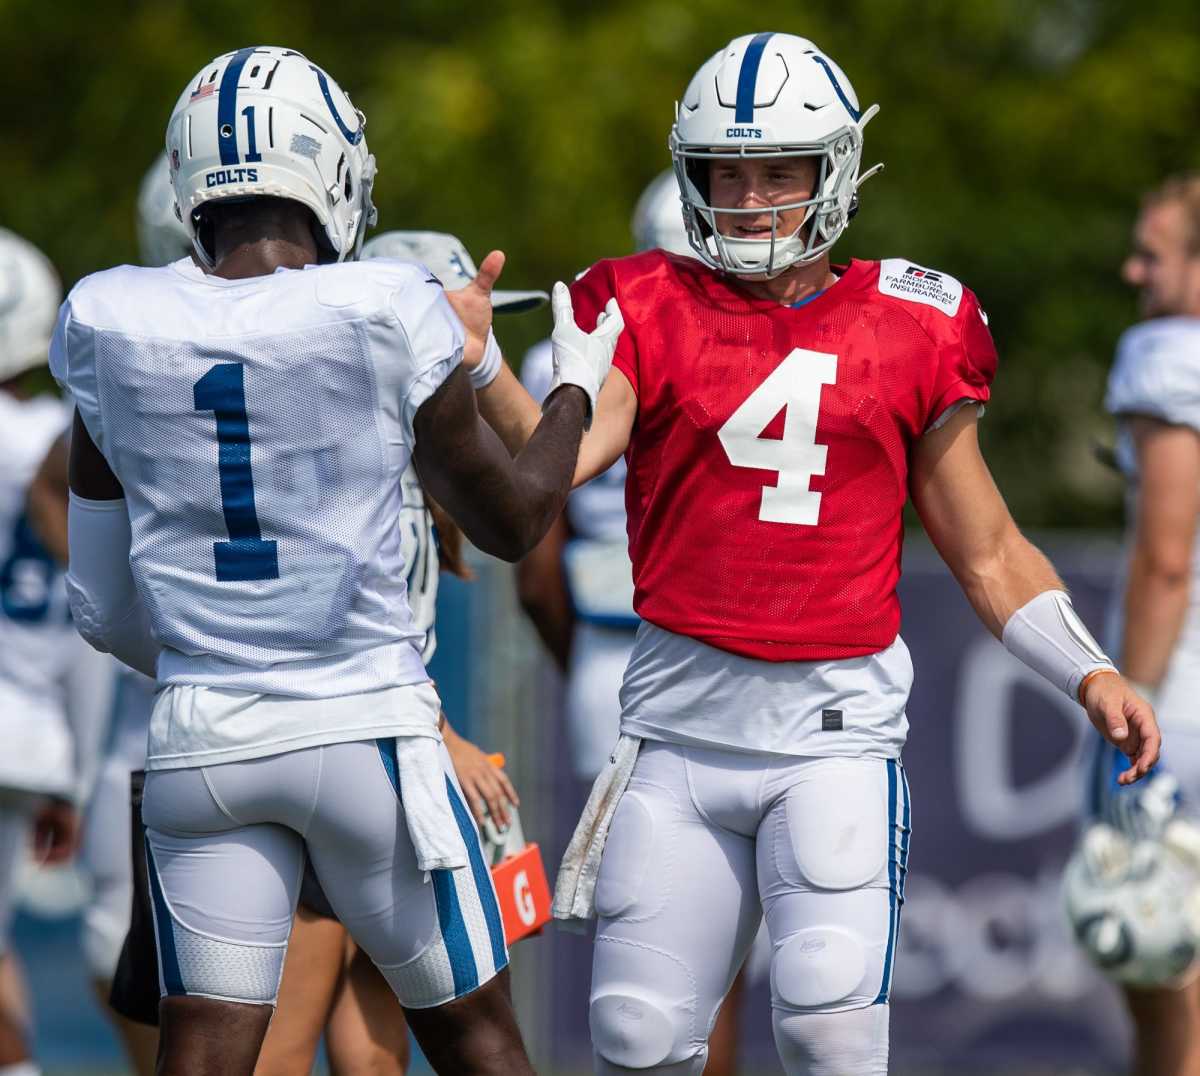 Indianapolis Colts quarterback Sam Ehlinger (4) gets ready for a one-on-one drill against the Carolina Panthers alongside Colts wide receiver Parris Campbell (1) on Friday, Aug. 13, 2021. Indianapolis Colts Host Carolina Panthers At Grand Park In Westfield Ind